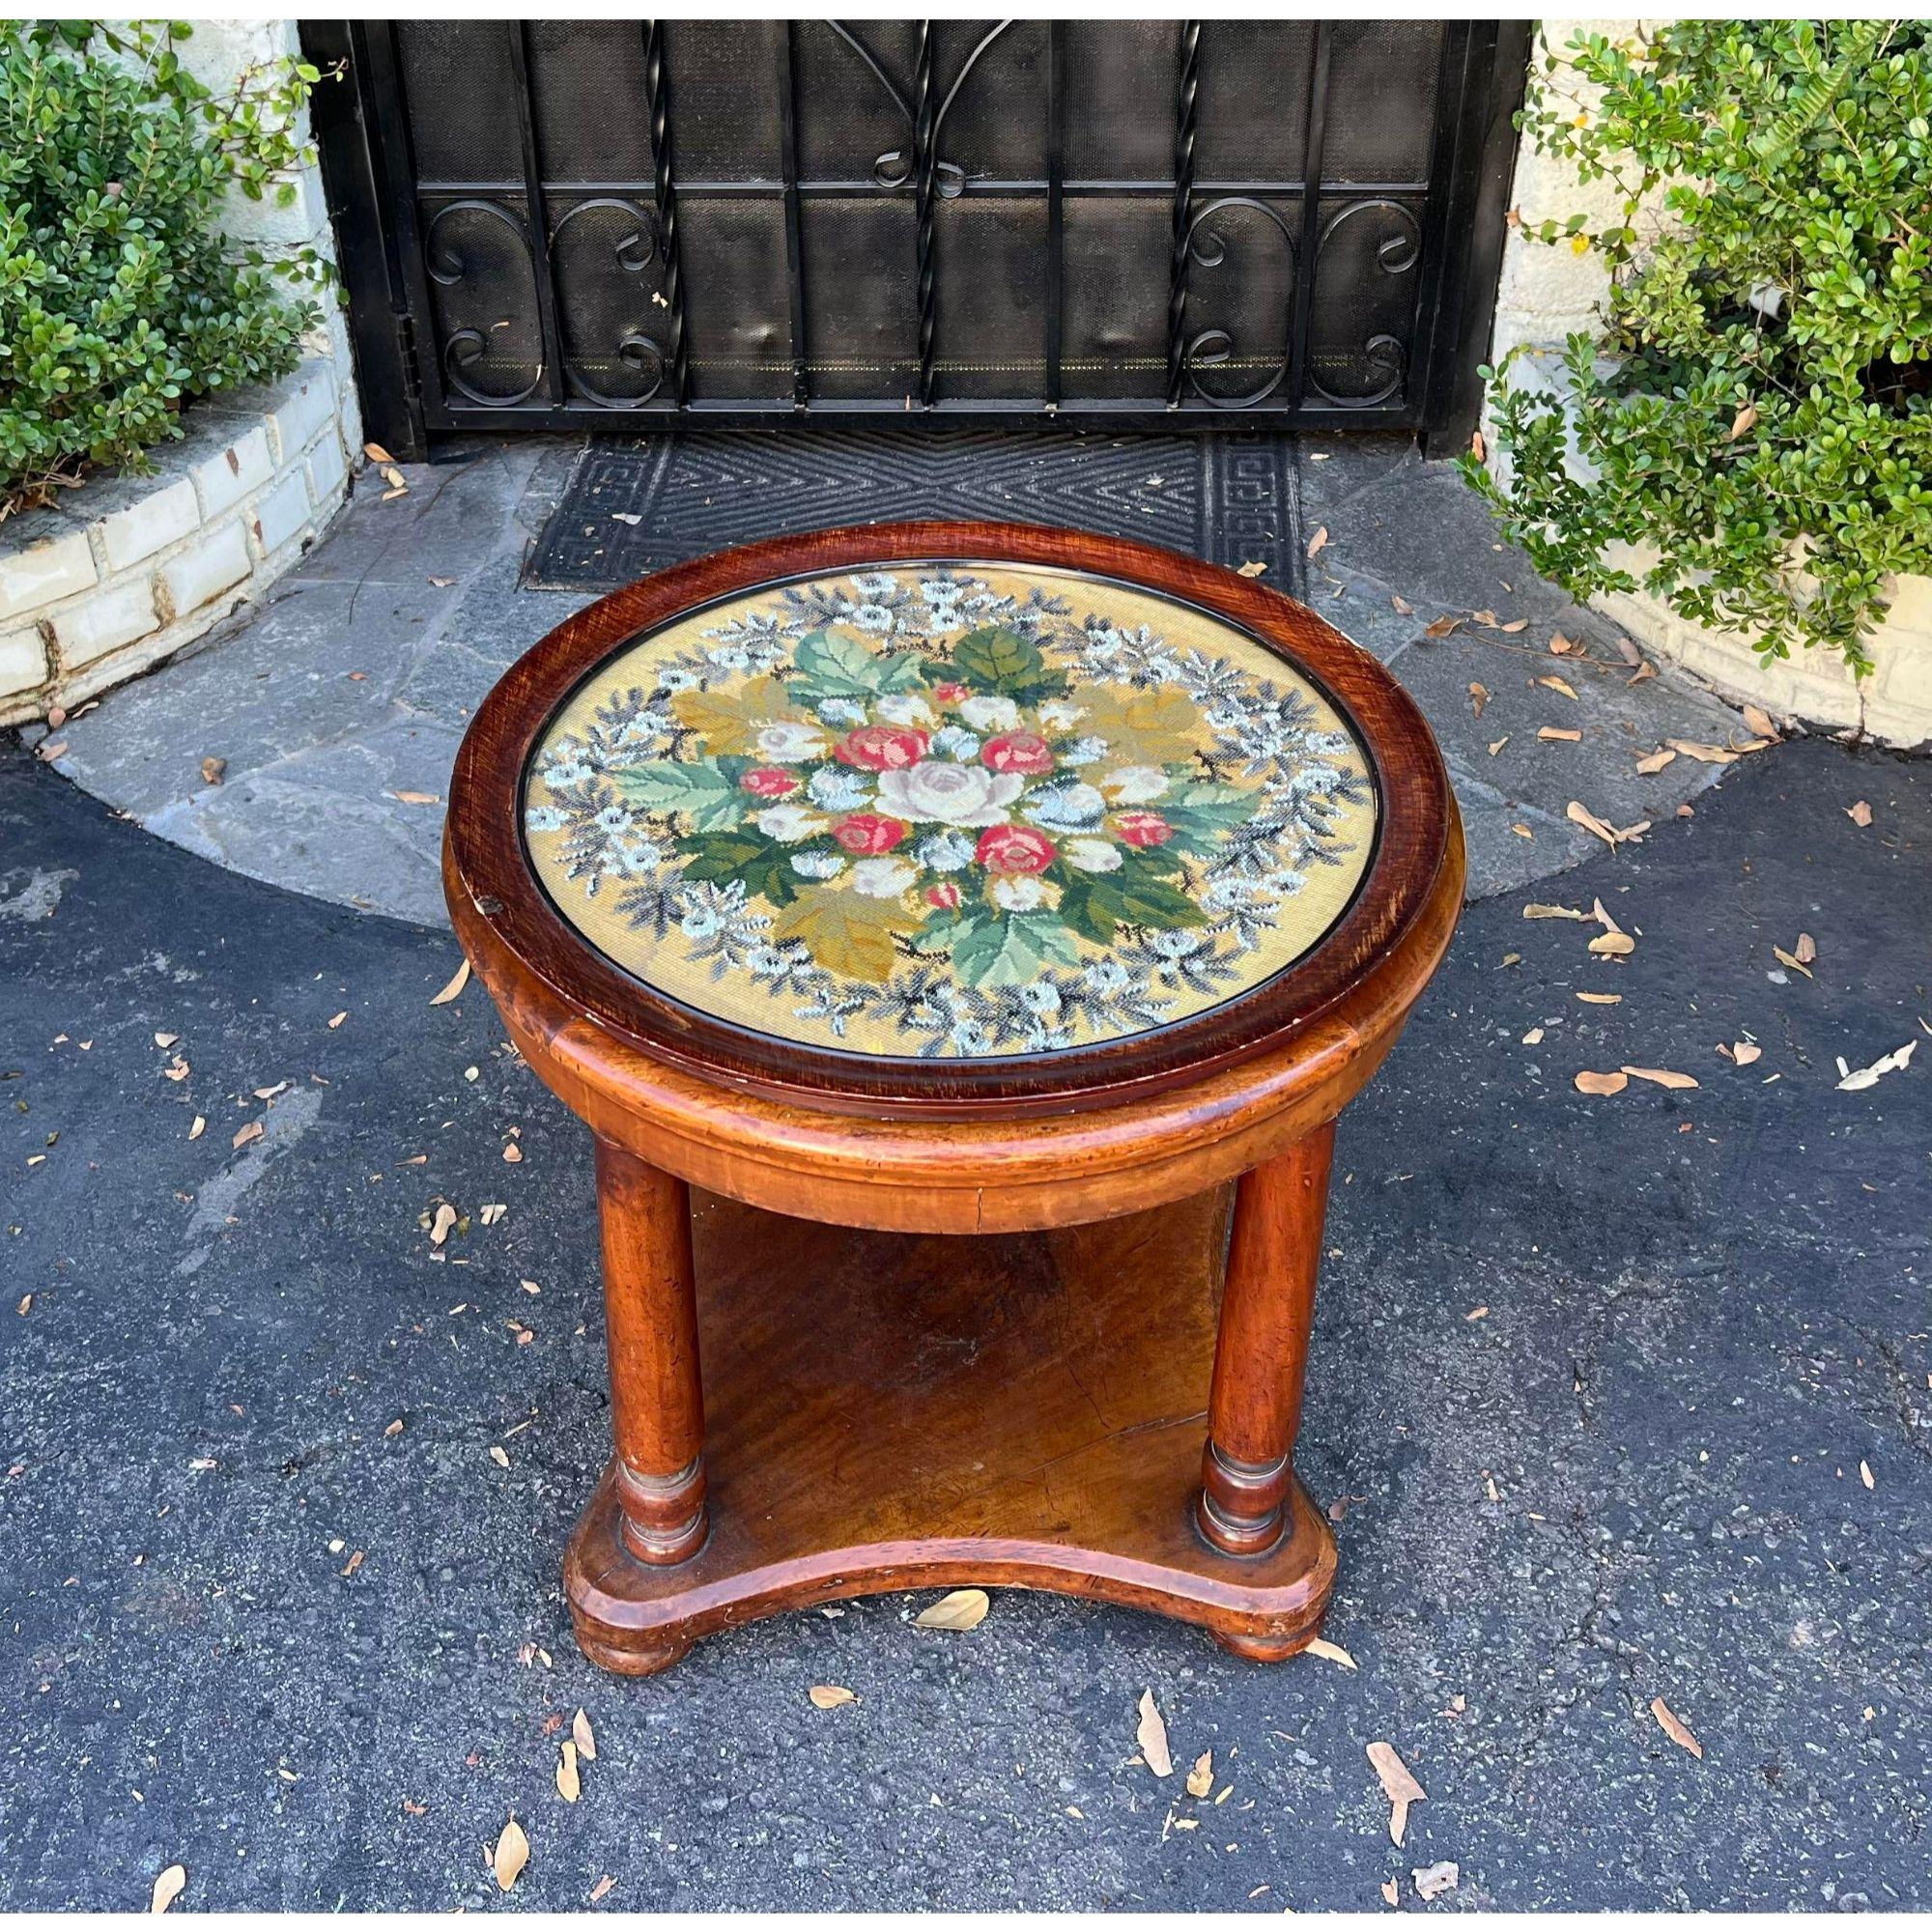 Antique Mahogany Side Table W Petitoint & Glass Tray Top. It features a removable tray top with a petit needlepoint under glass

Additional information: 
Materials: Glass, Mahogany
Color: Brown
Period: 19th Century
Styles: Victorian
Table Shape: